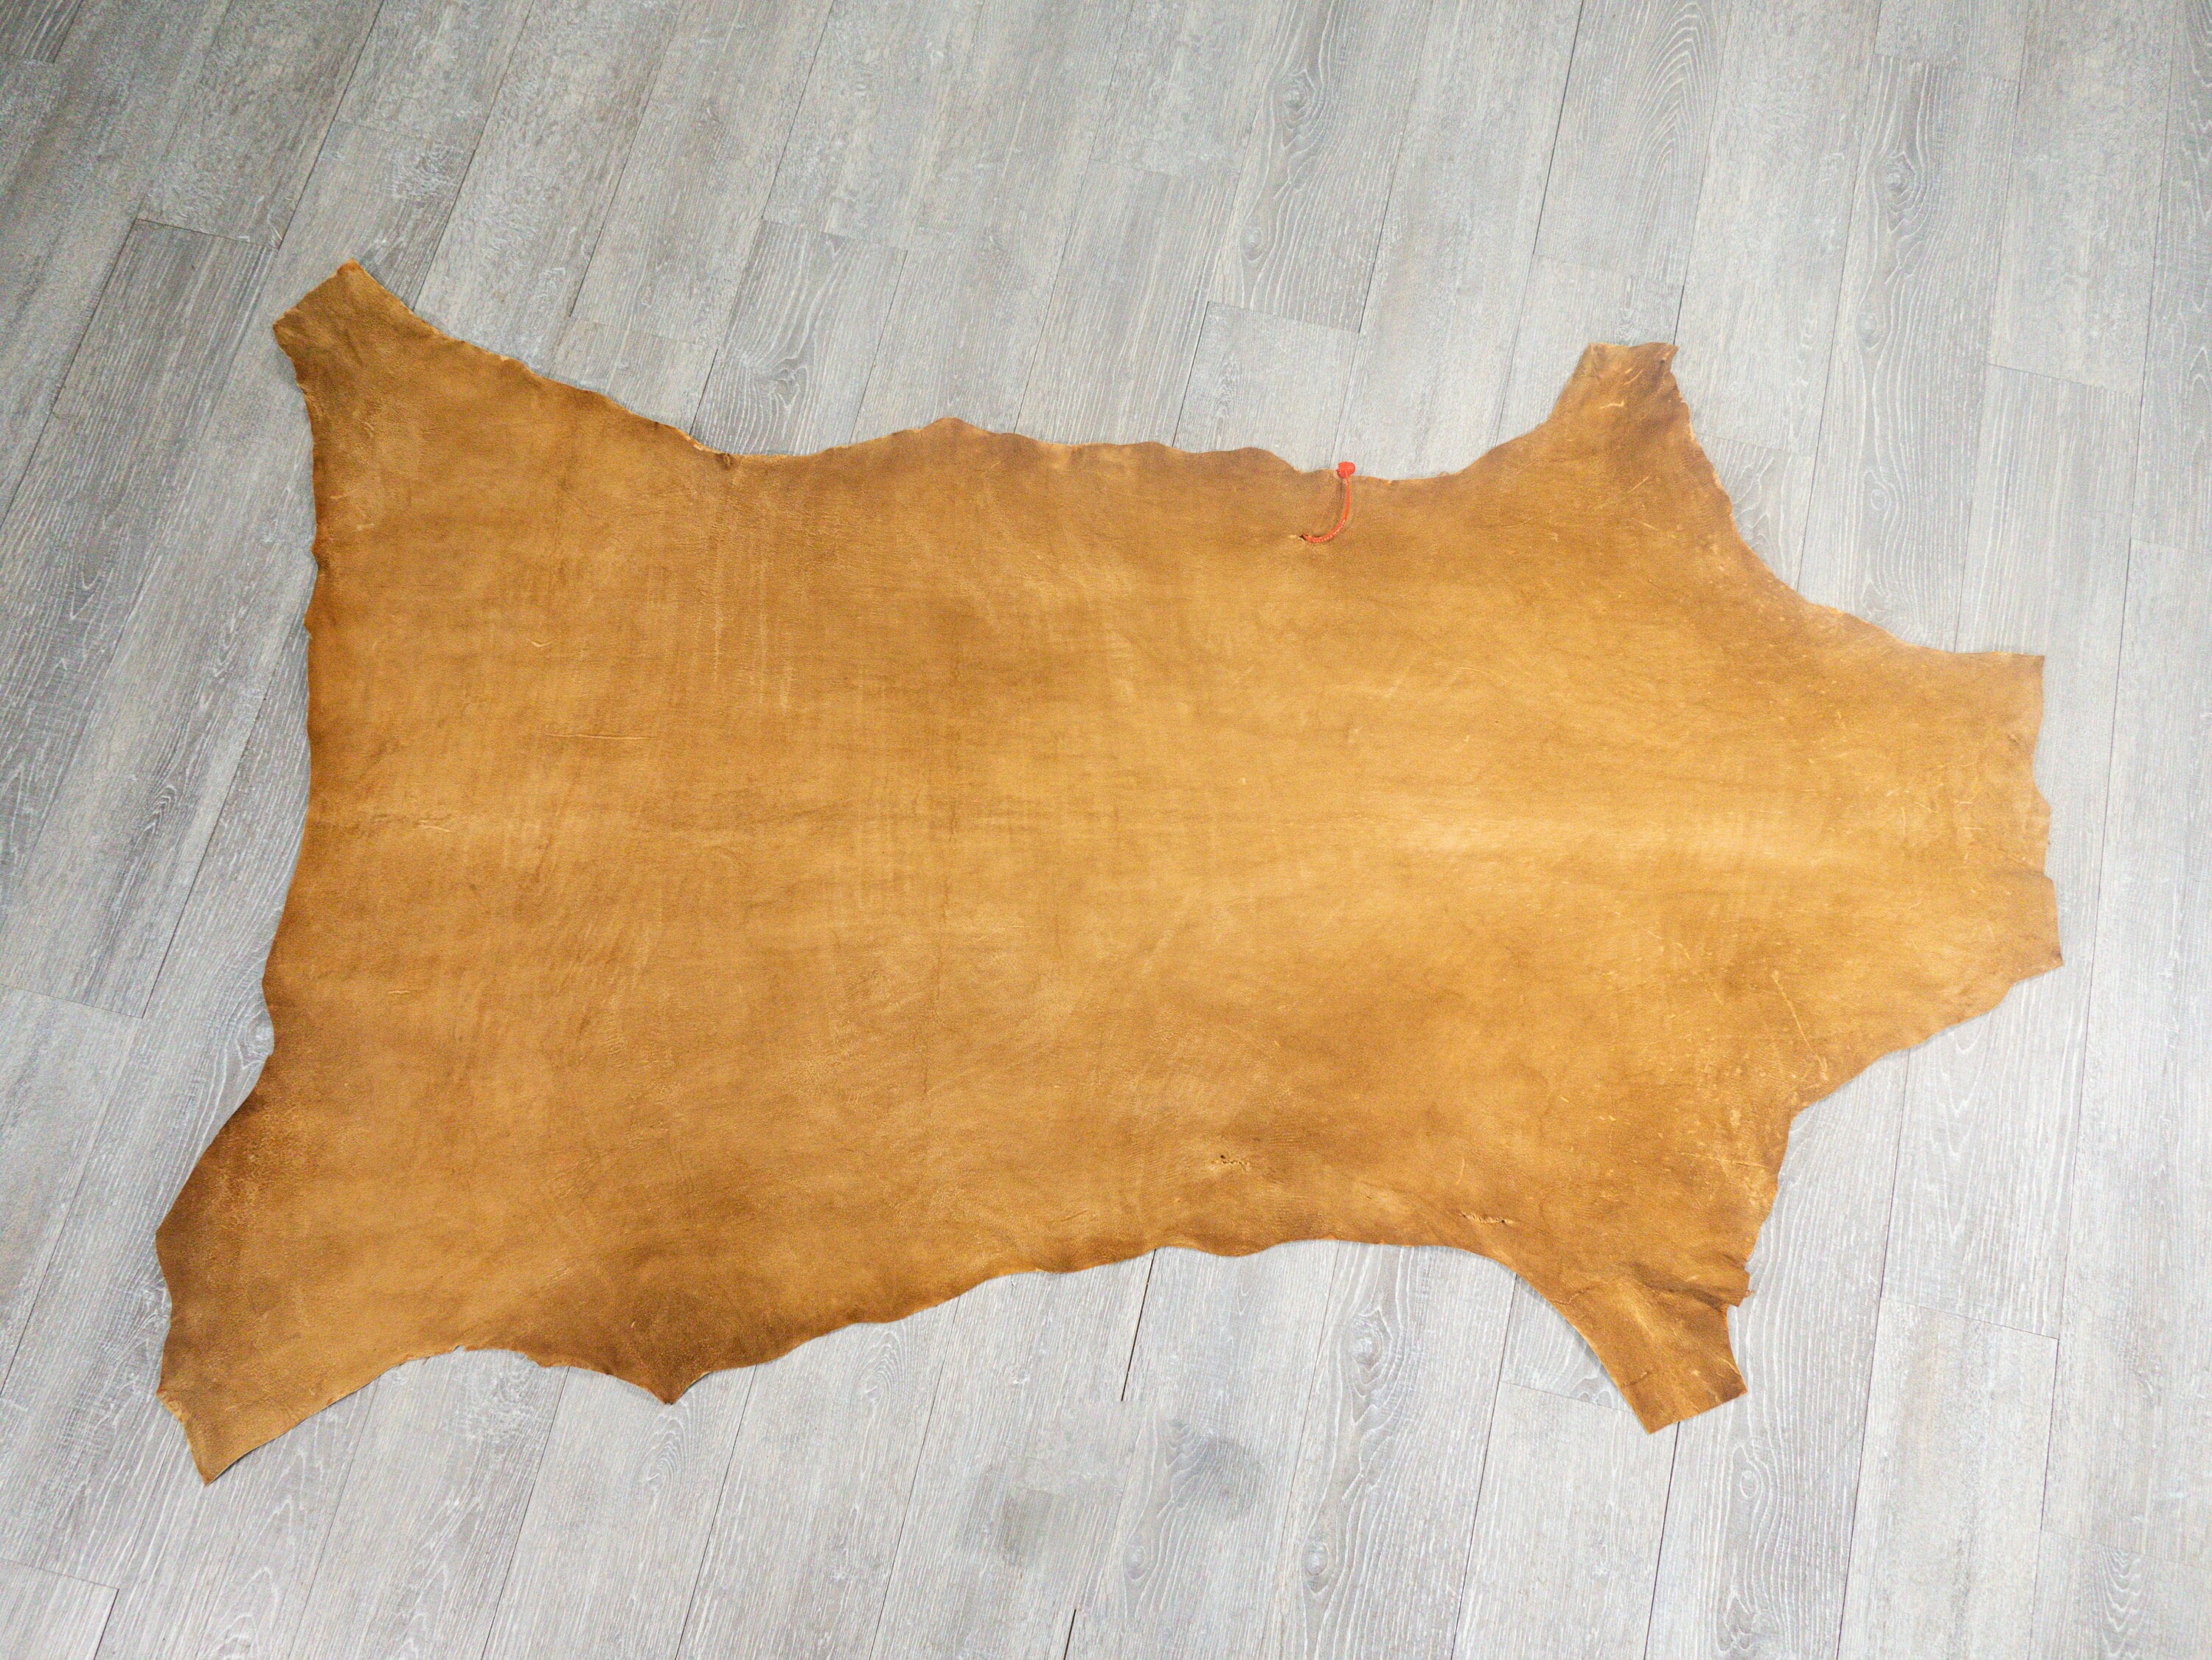 Deer hide tanned- I messed up : r/Leathercraft